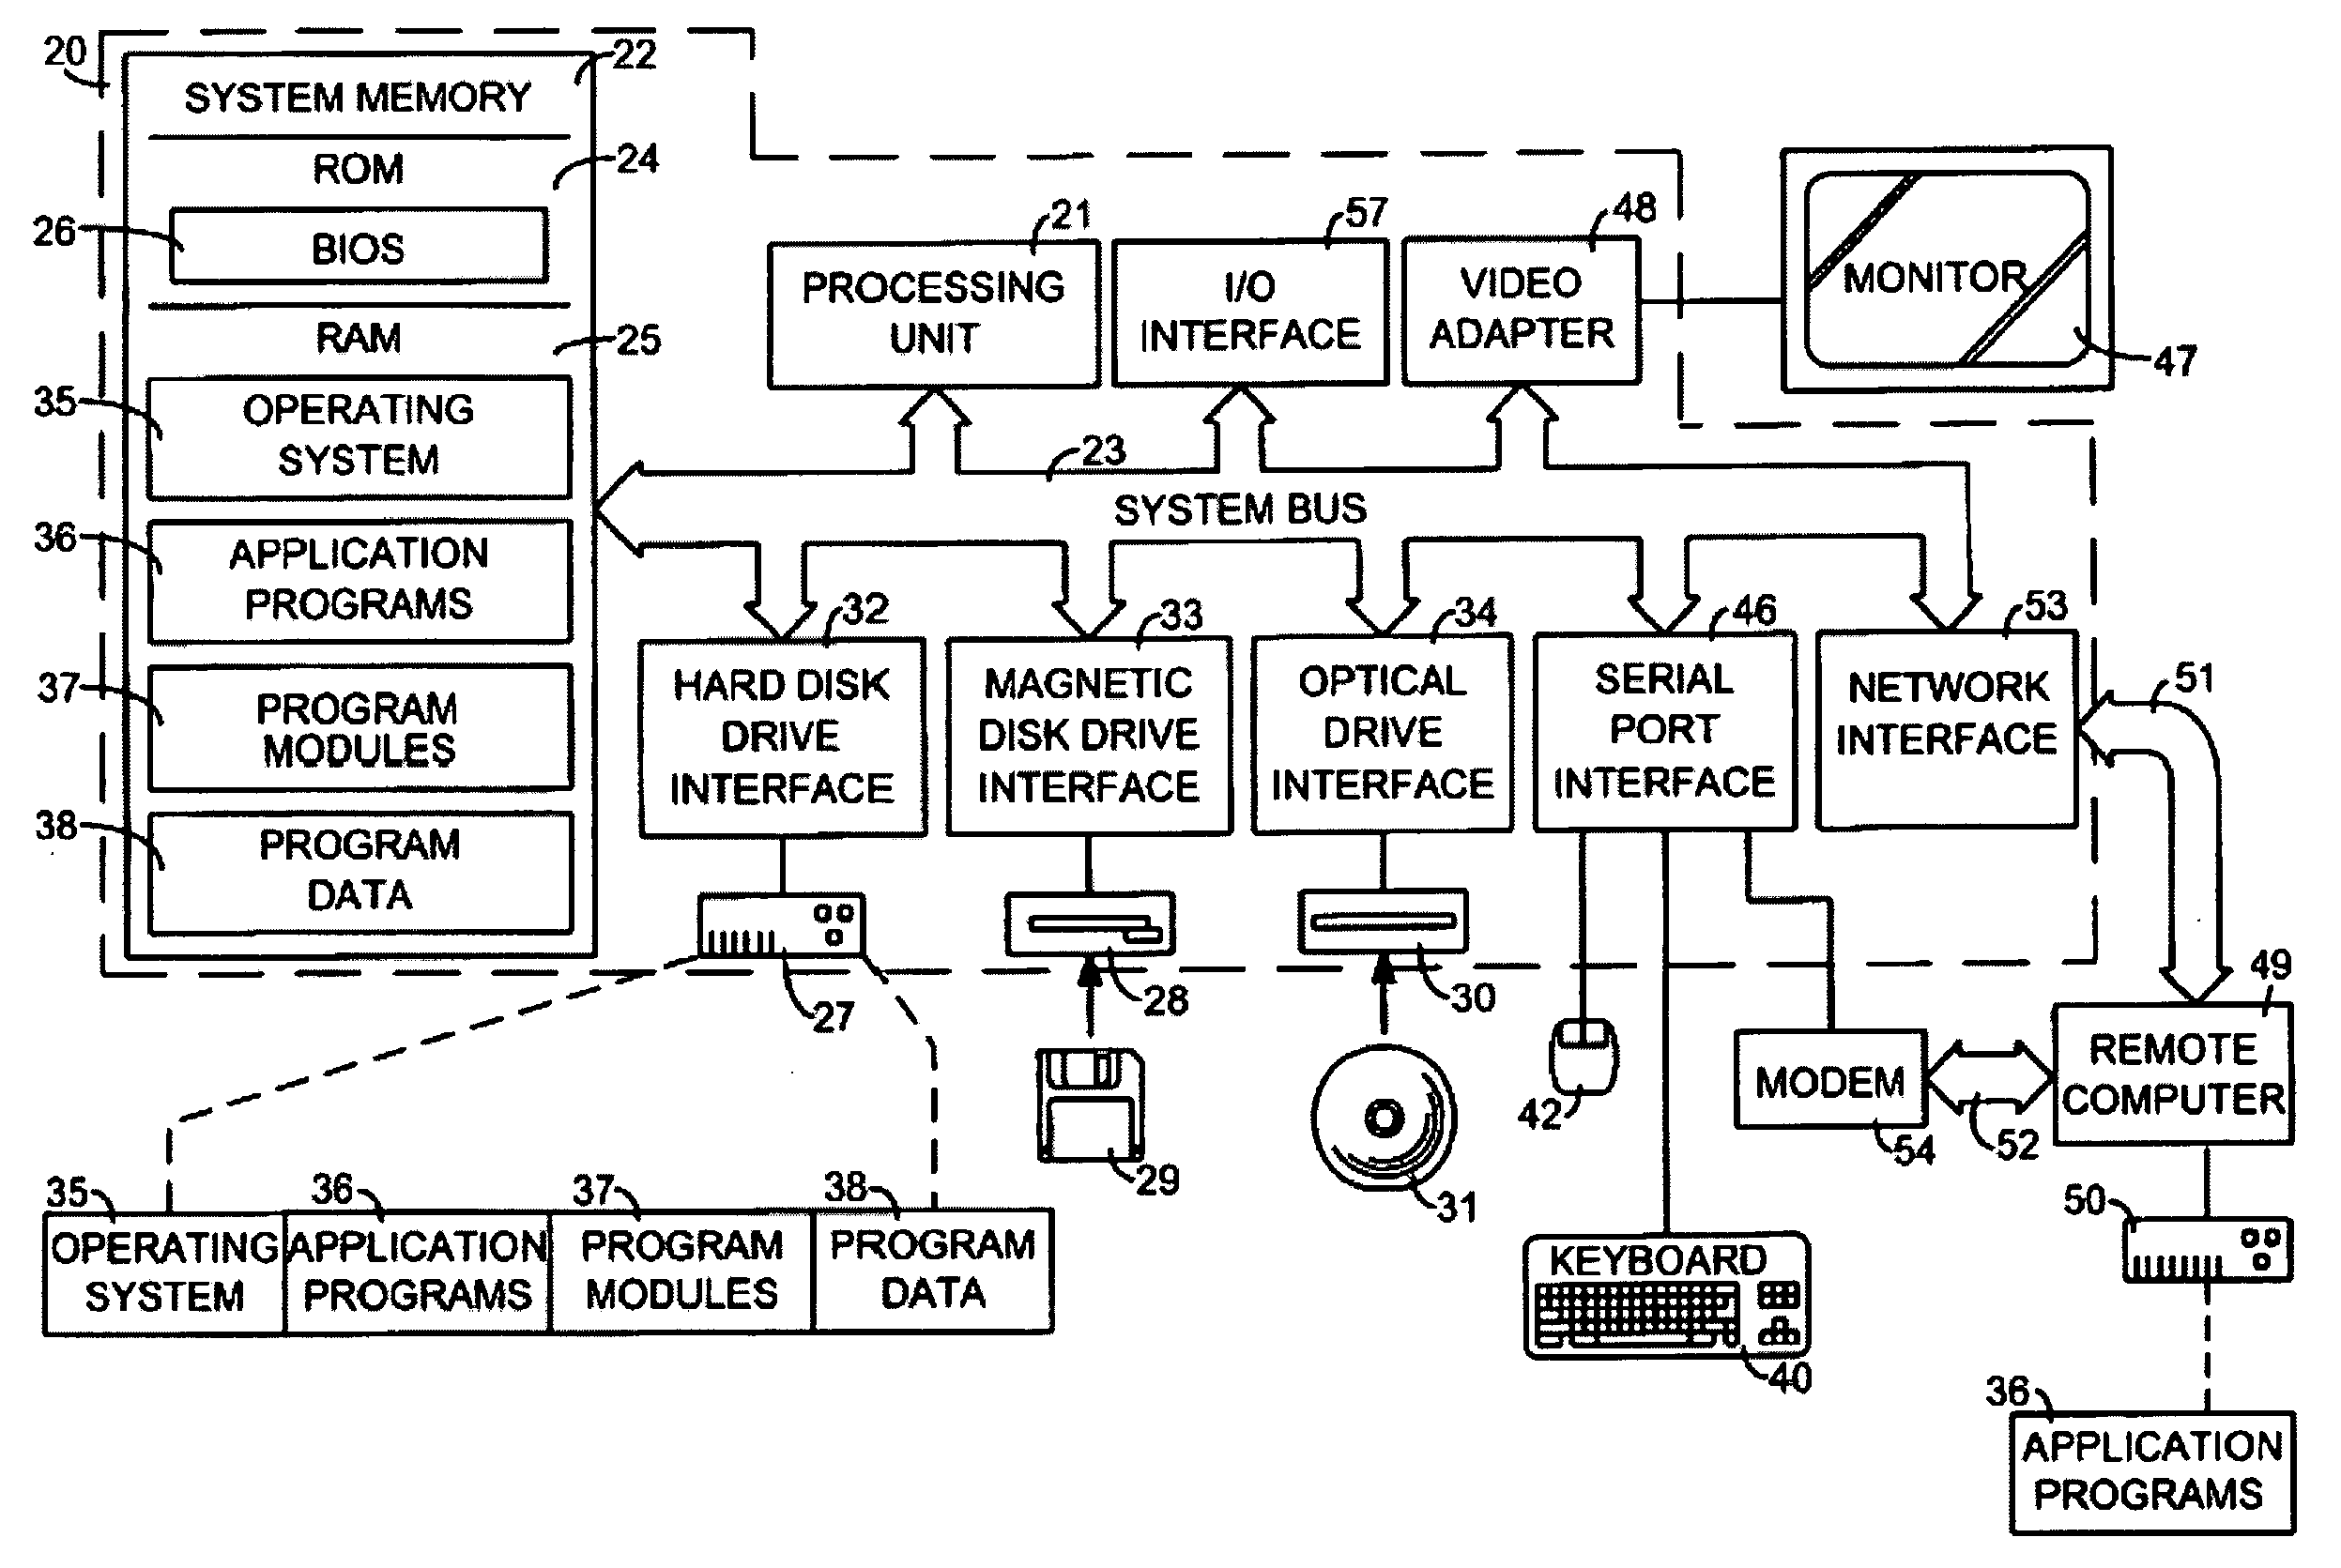 Systems, methods, and computer program products for tracking and controlling Internet use and recovering costs associated therewith